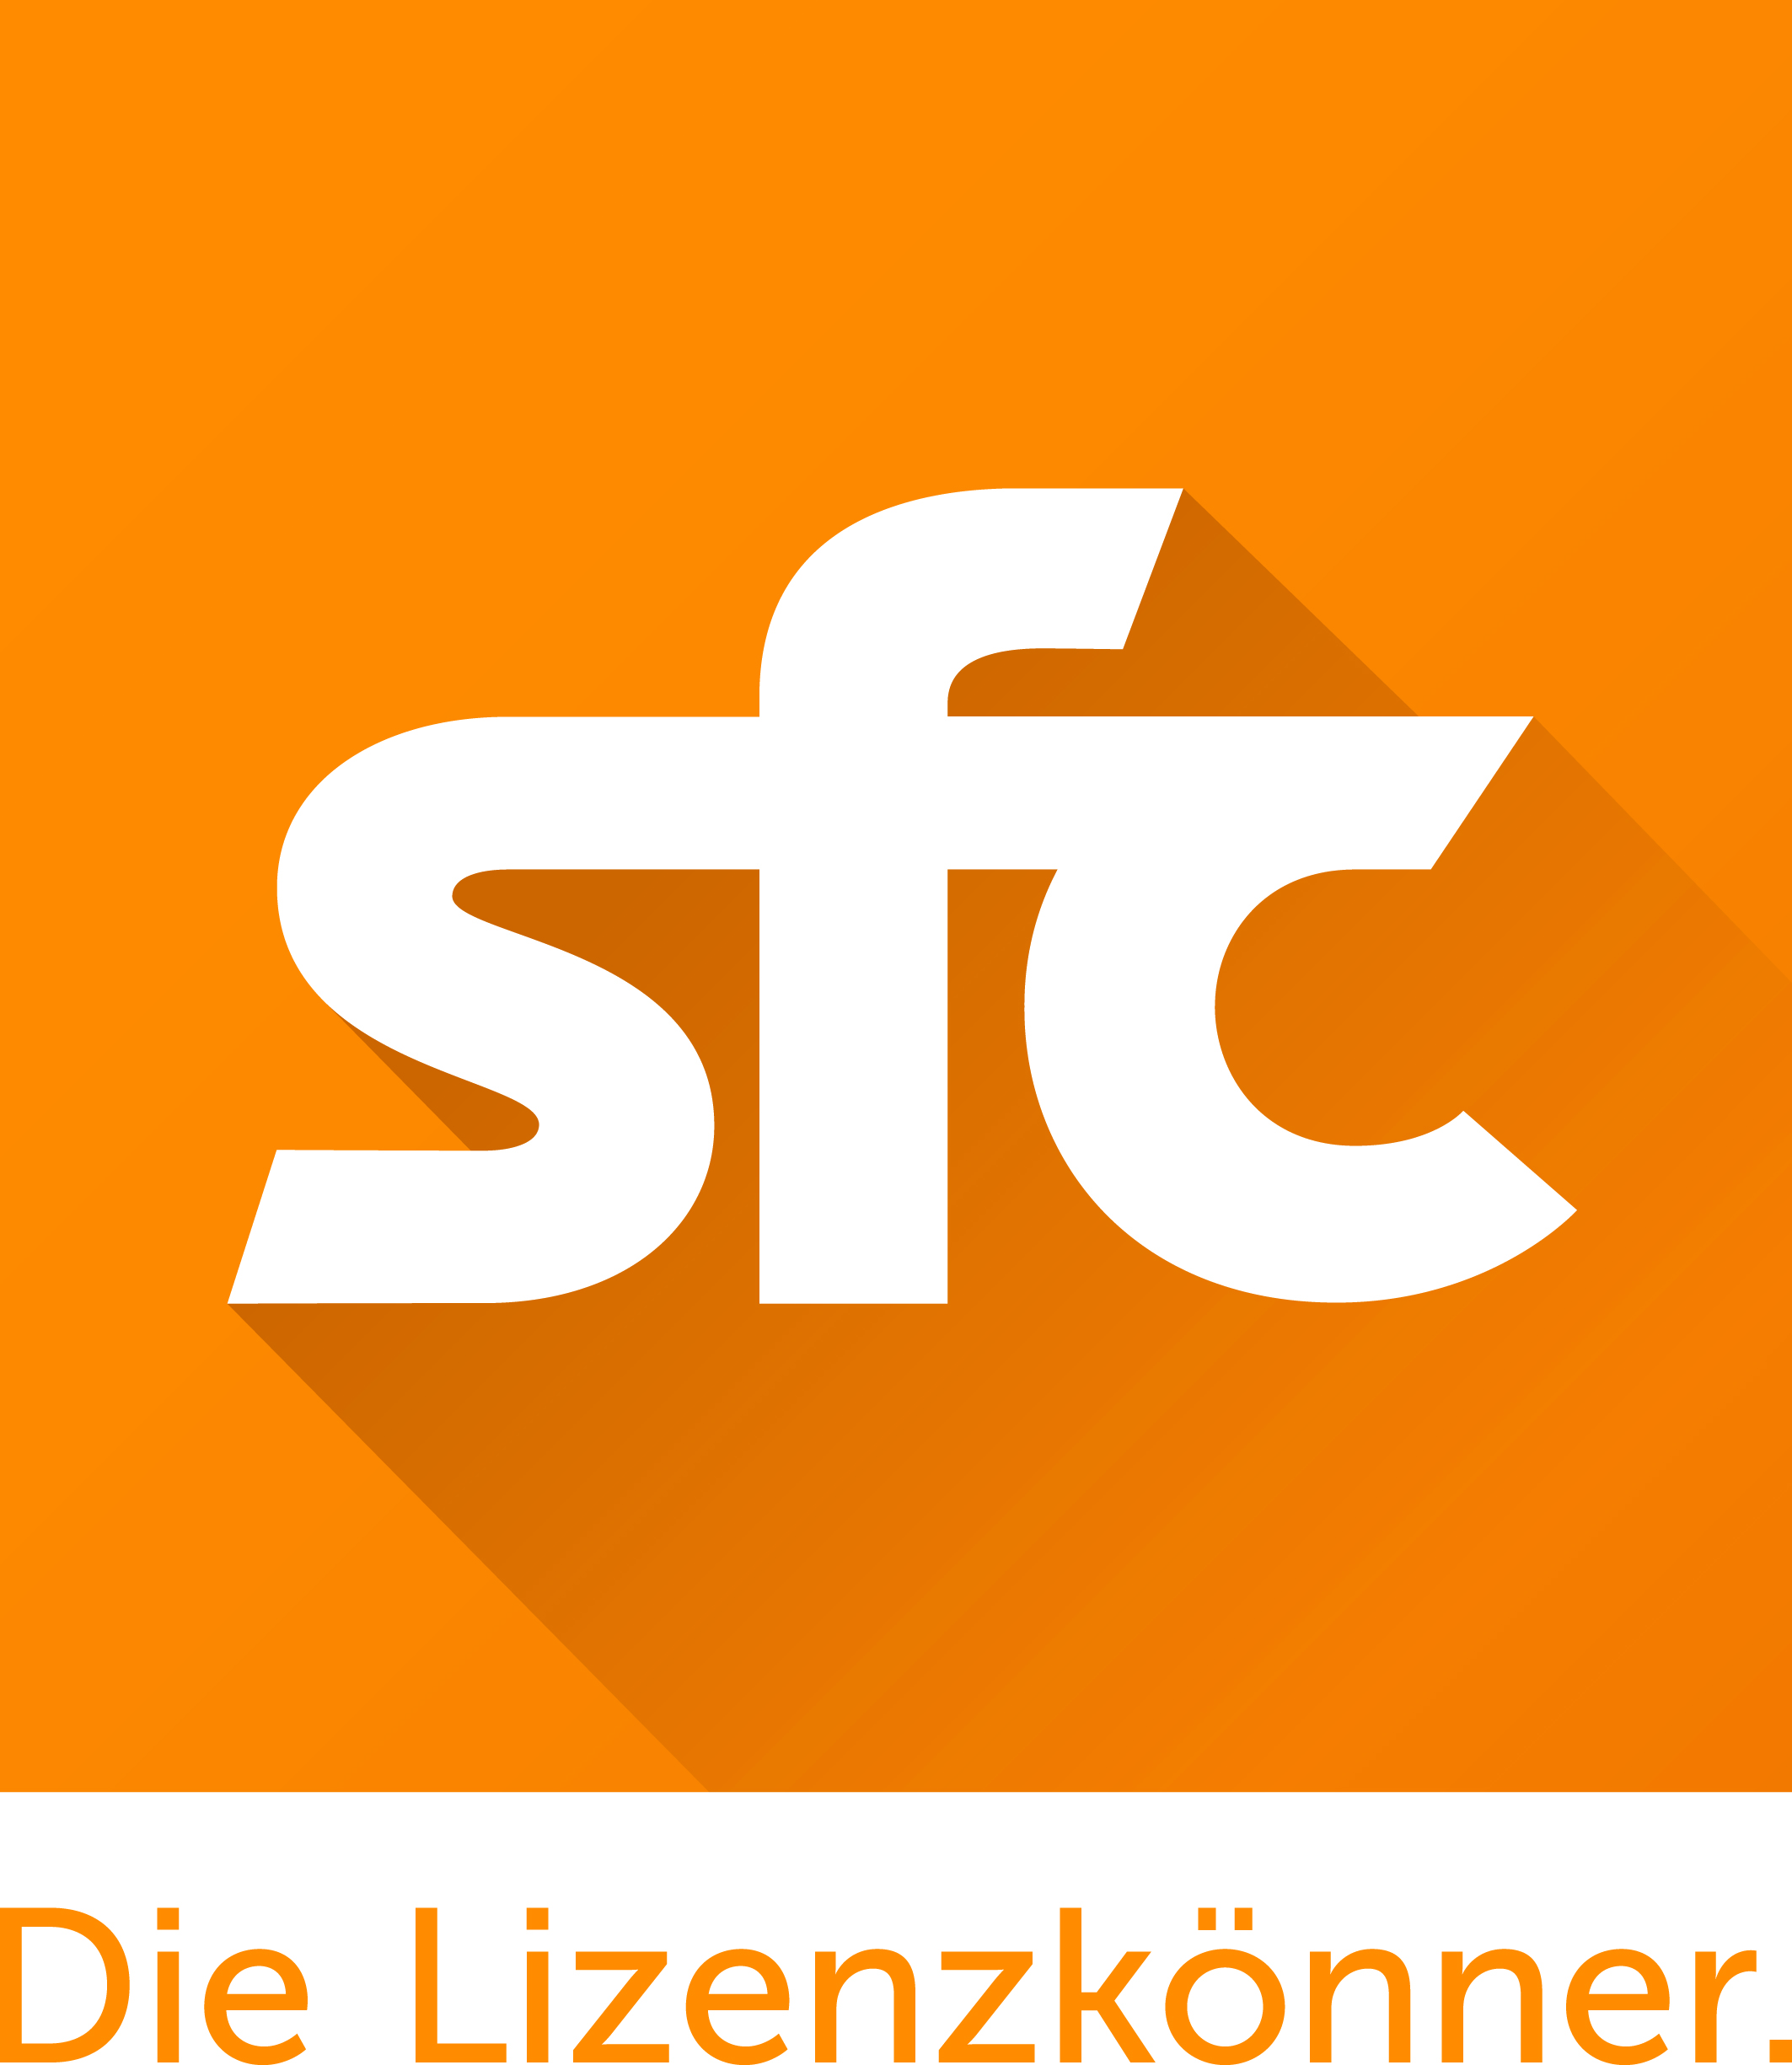 SFC Software for Companies GmbH